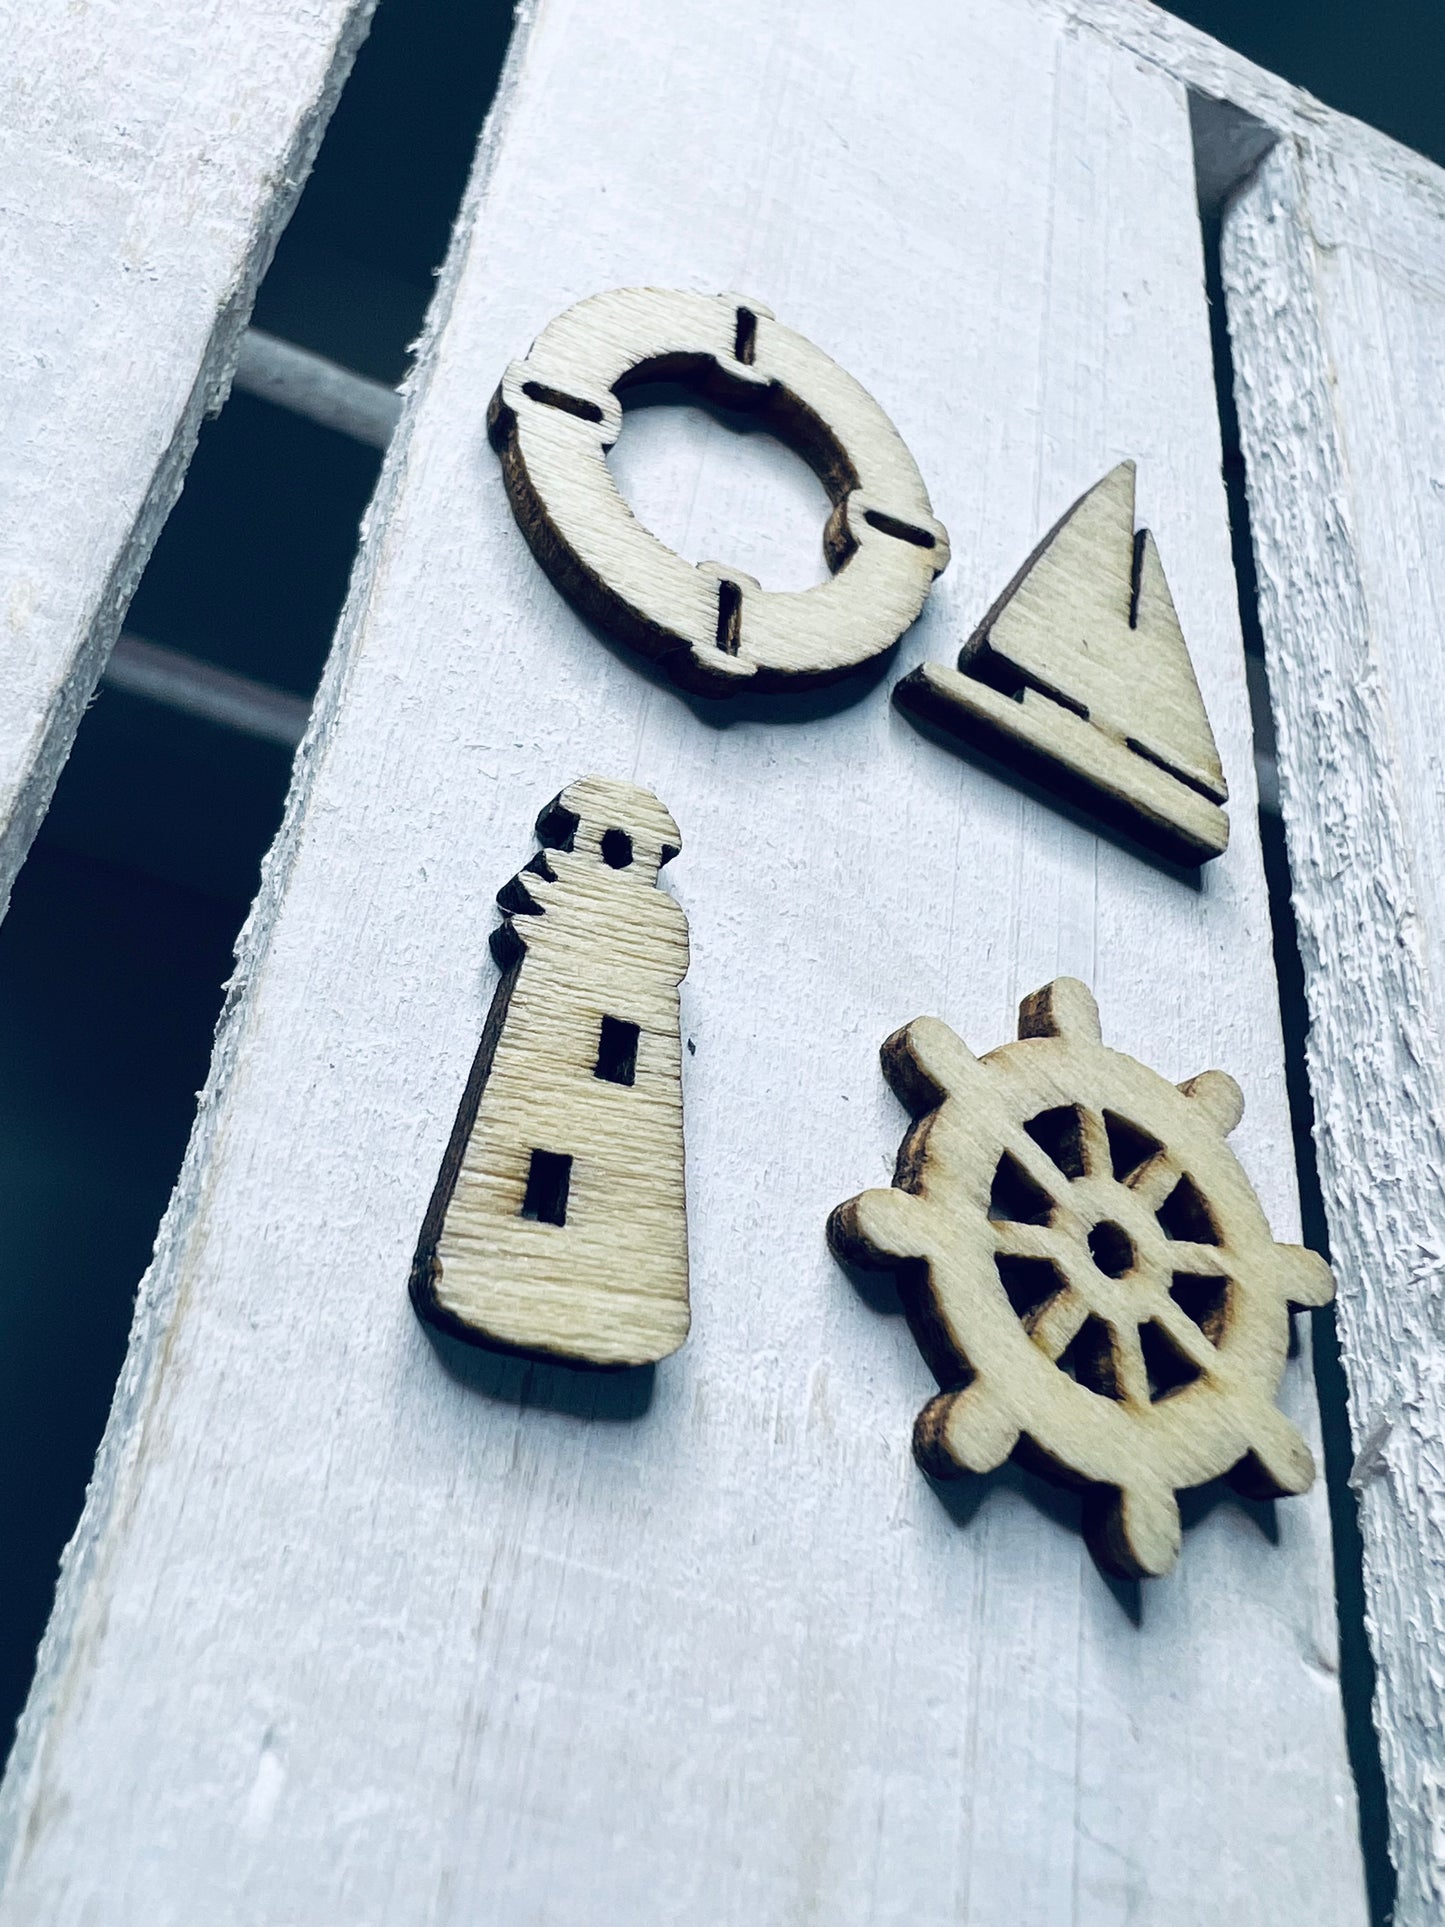 Wood Cutout NAUTICAL Mini Objects INCLUDES 4 Objects Speech Therapy Miniature Ocean Trinkets Doodads Wood Cut for Crafts